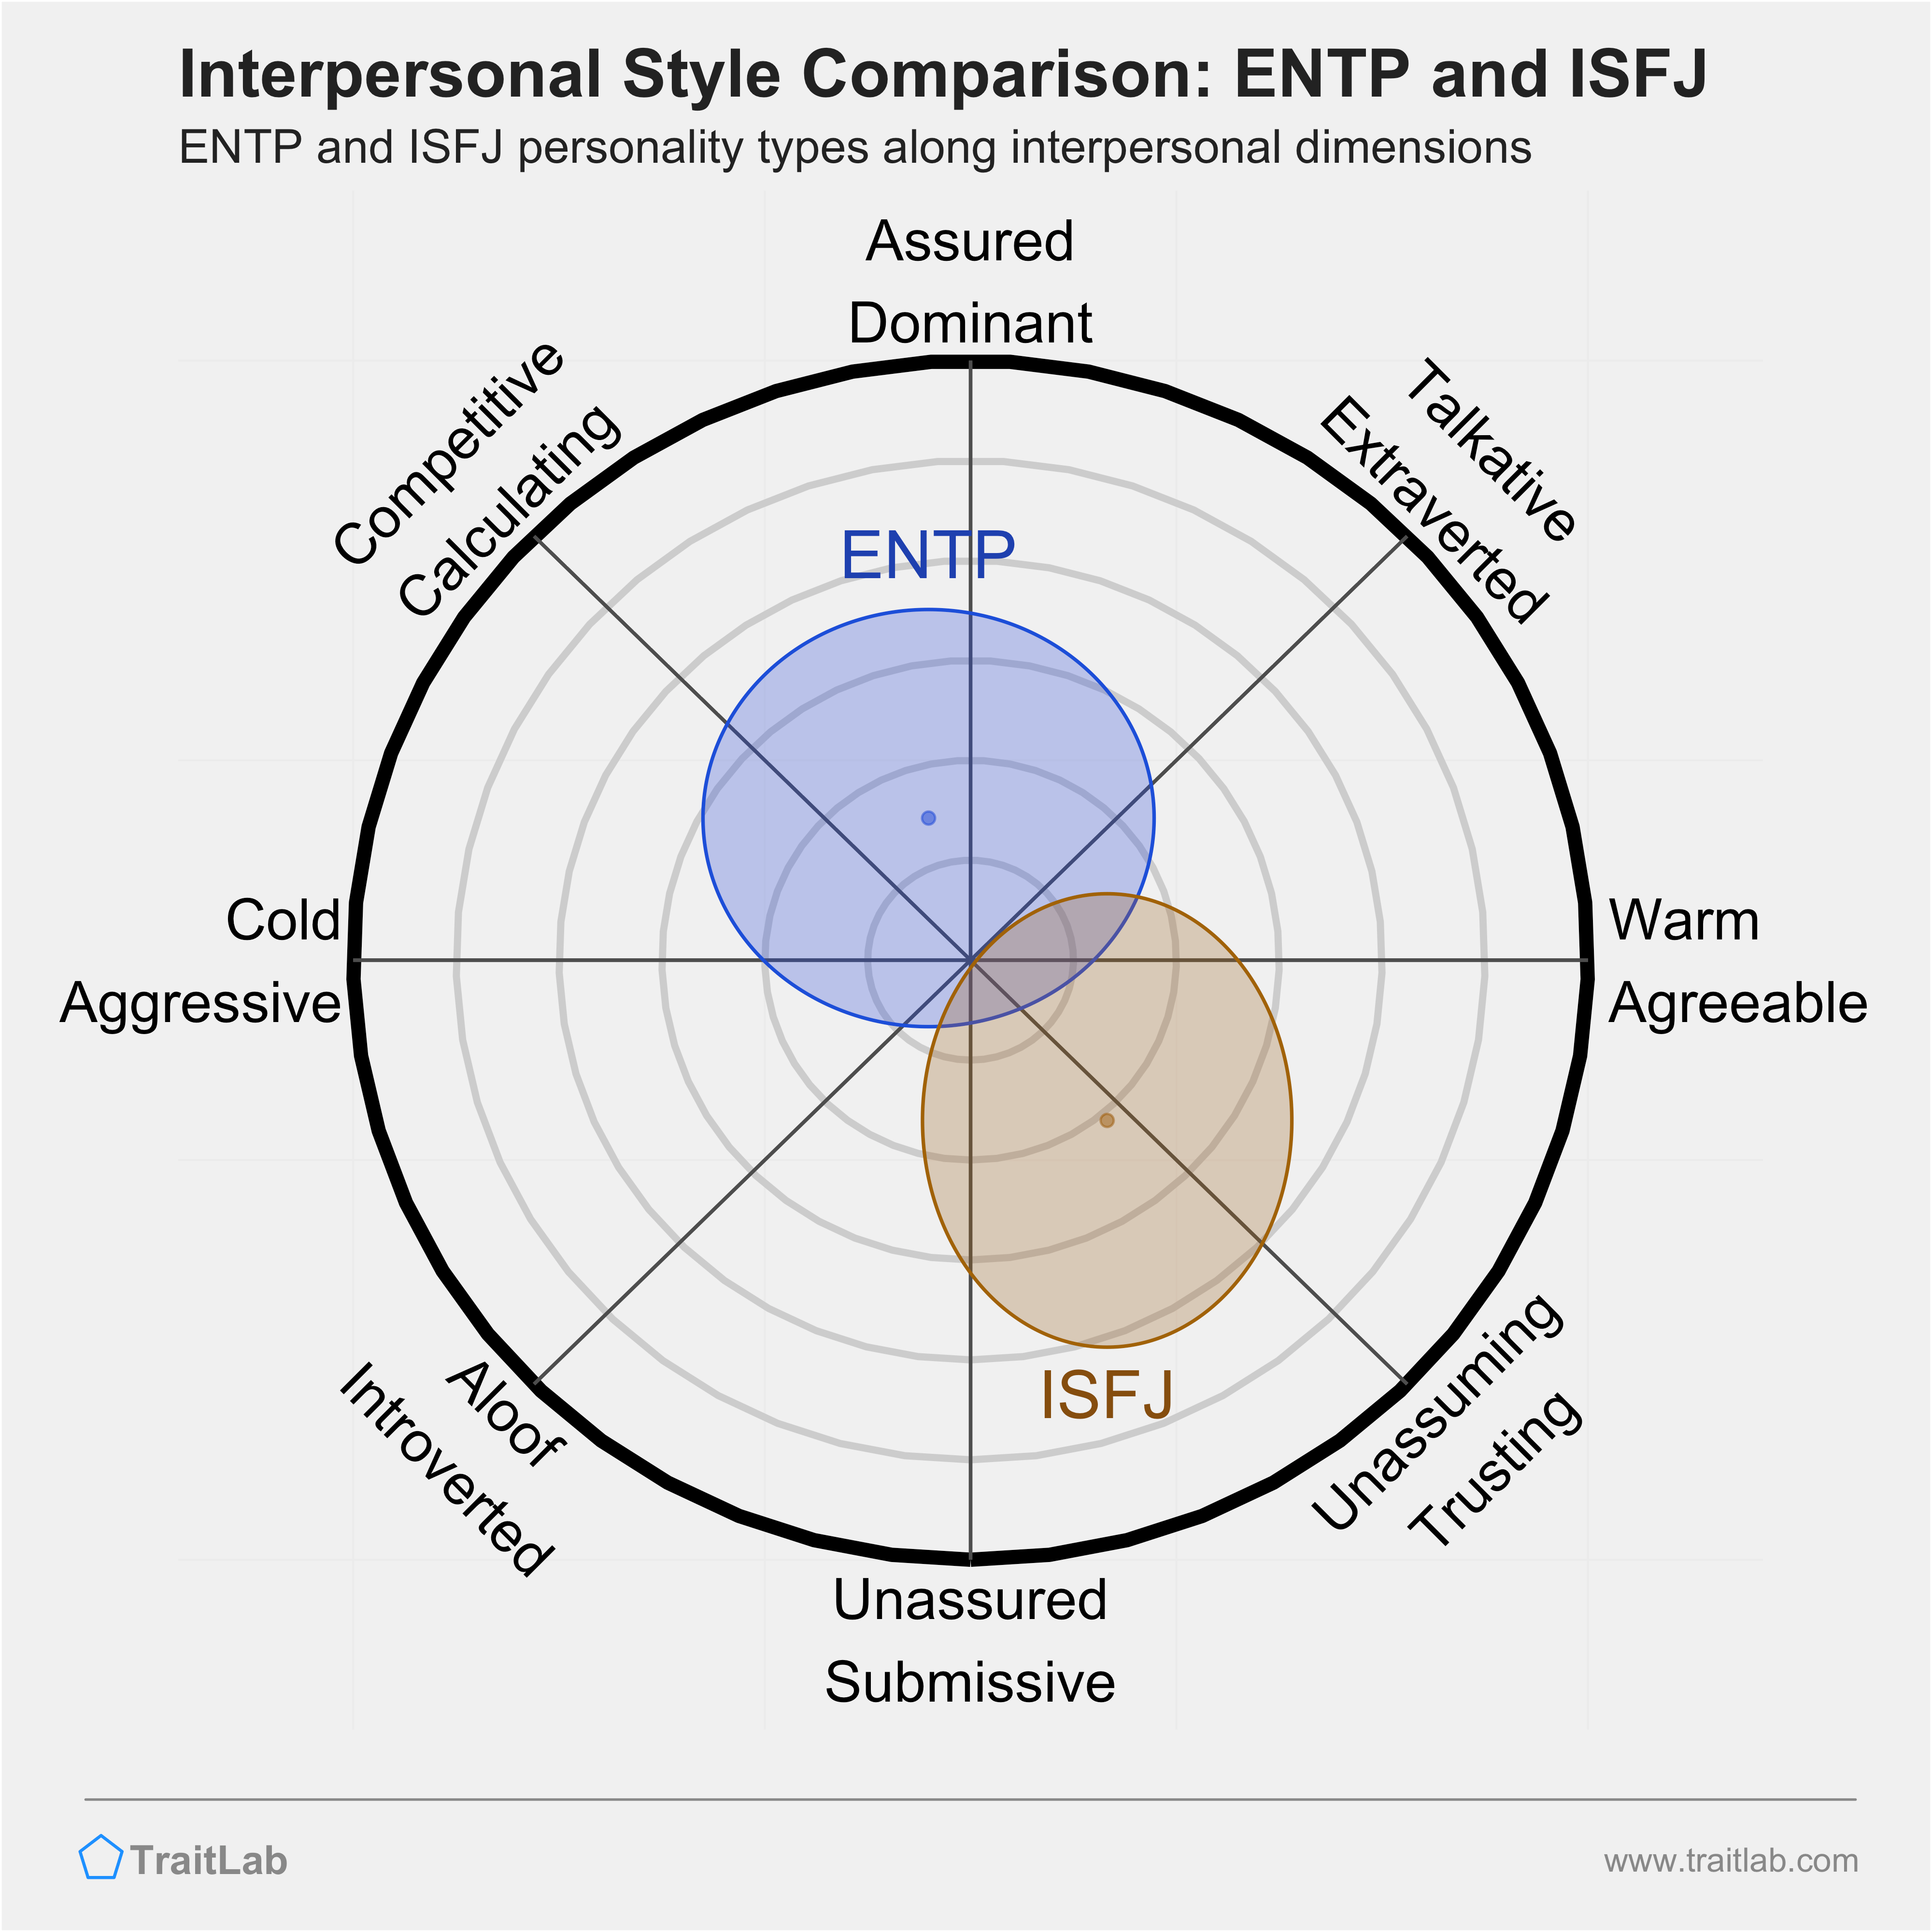 ENTP and ISFJ comparison across interpersonal dimensions